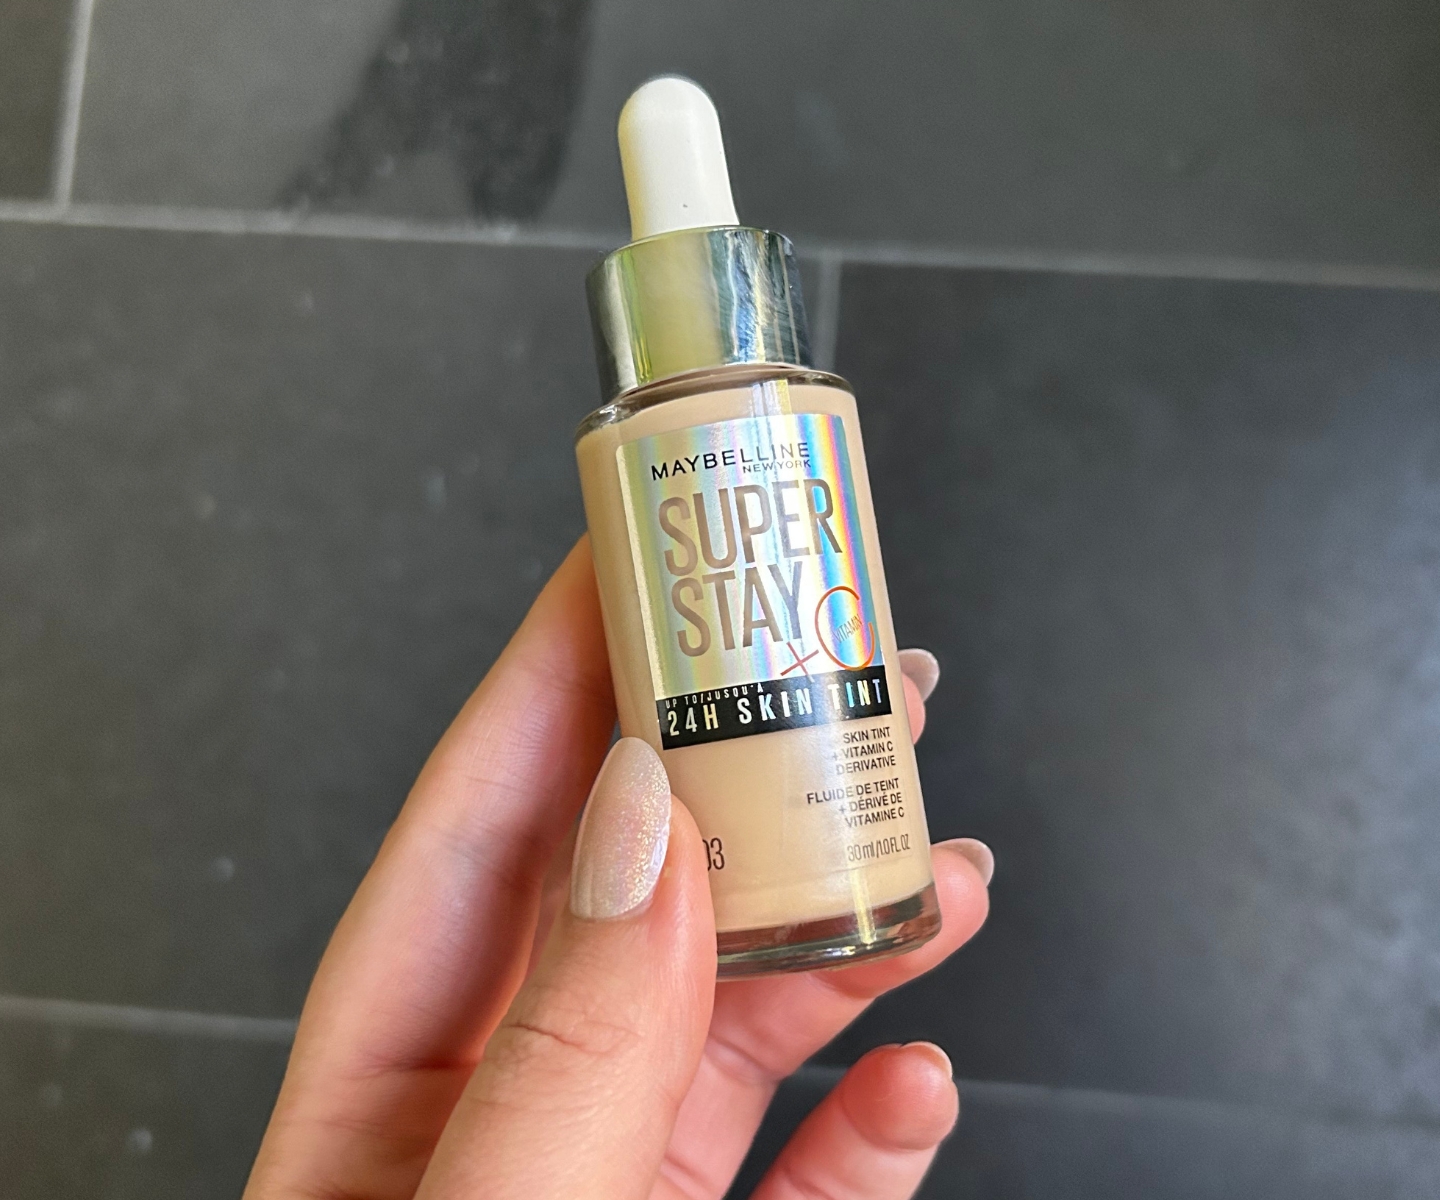 Super Stay 24-Hour Skin Tint with Vitamin C - Maybelline